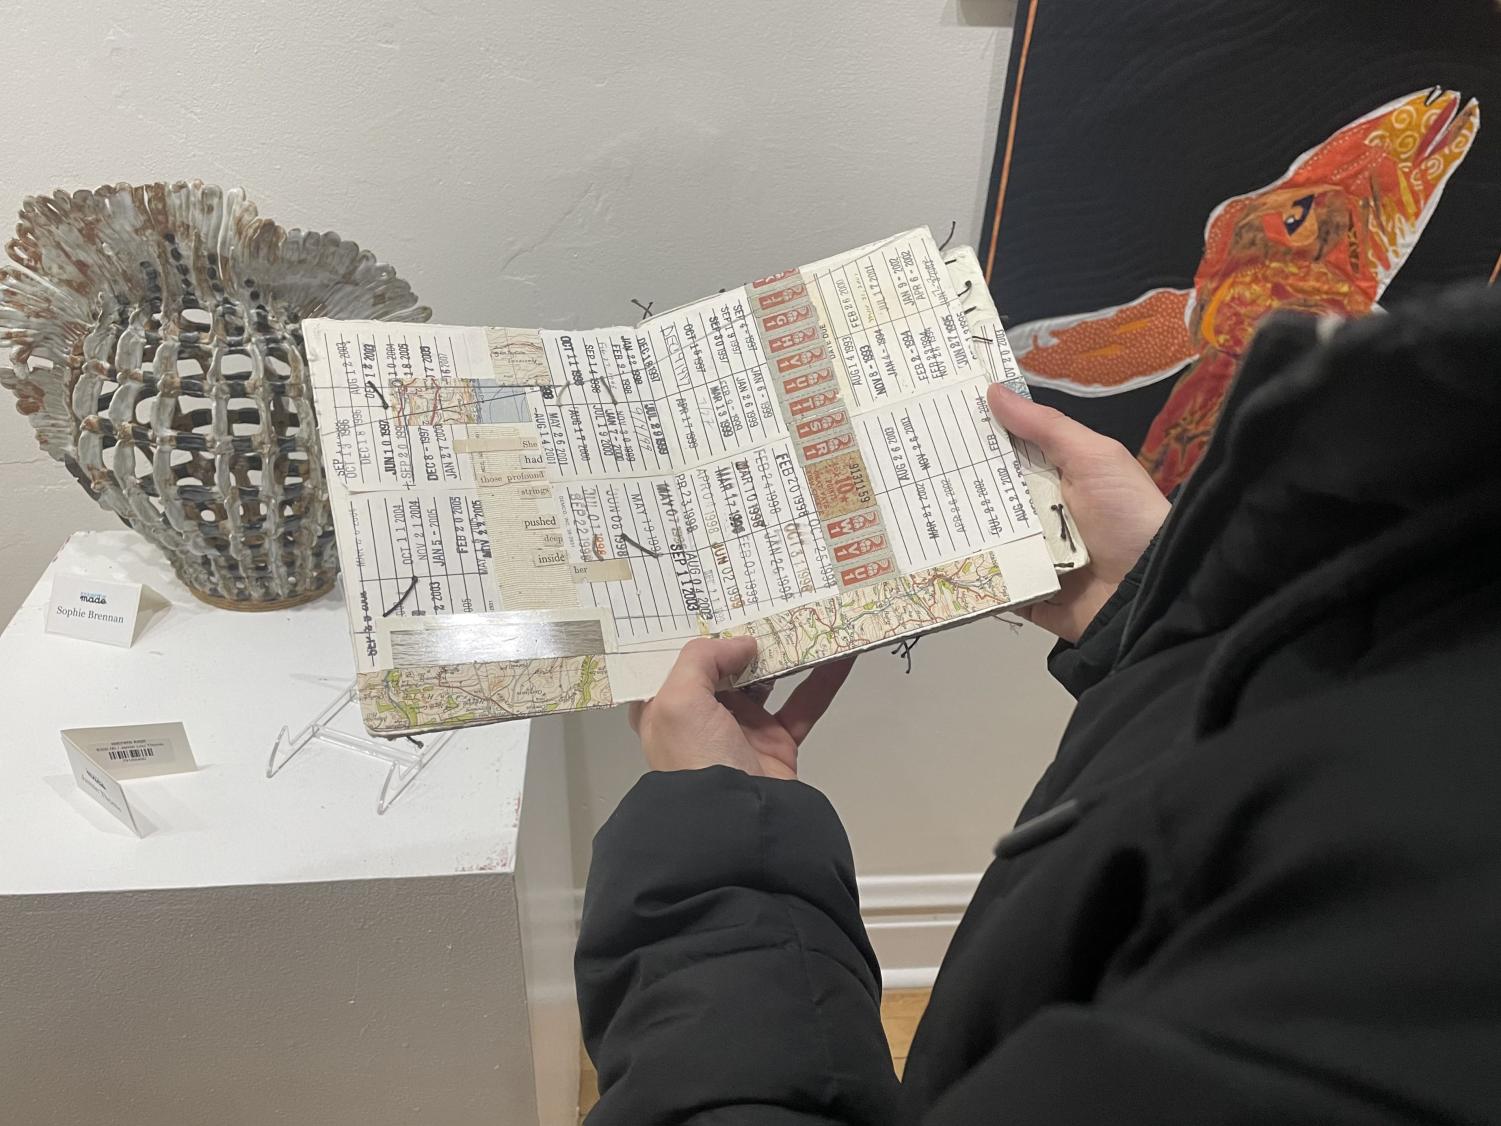 An+attendee+in+a+black+jacket+holds+up+a+handmade%2C+textured+paper+book.+In+the+background%2C+a+shell-like+vase+is+to+the+left+and+a+black+and+orange+weaving+is+seen+to+the+right.